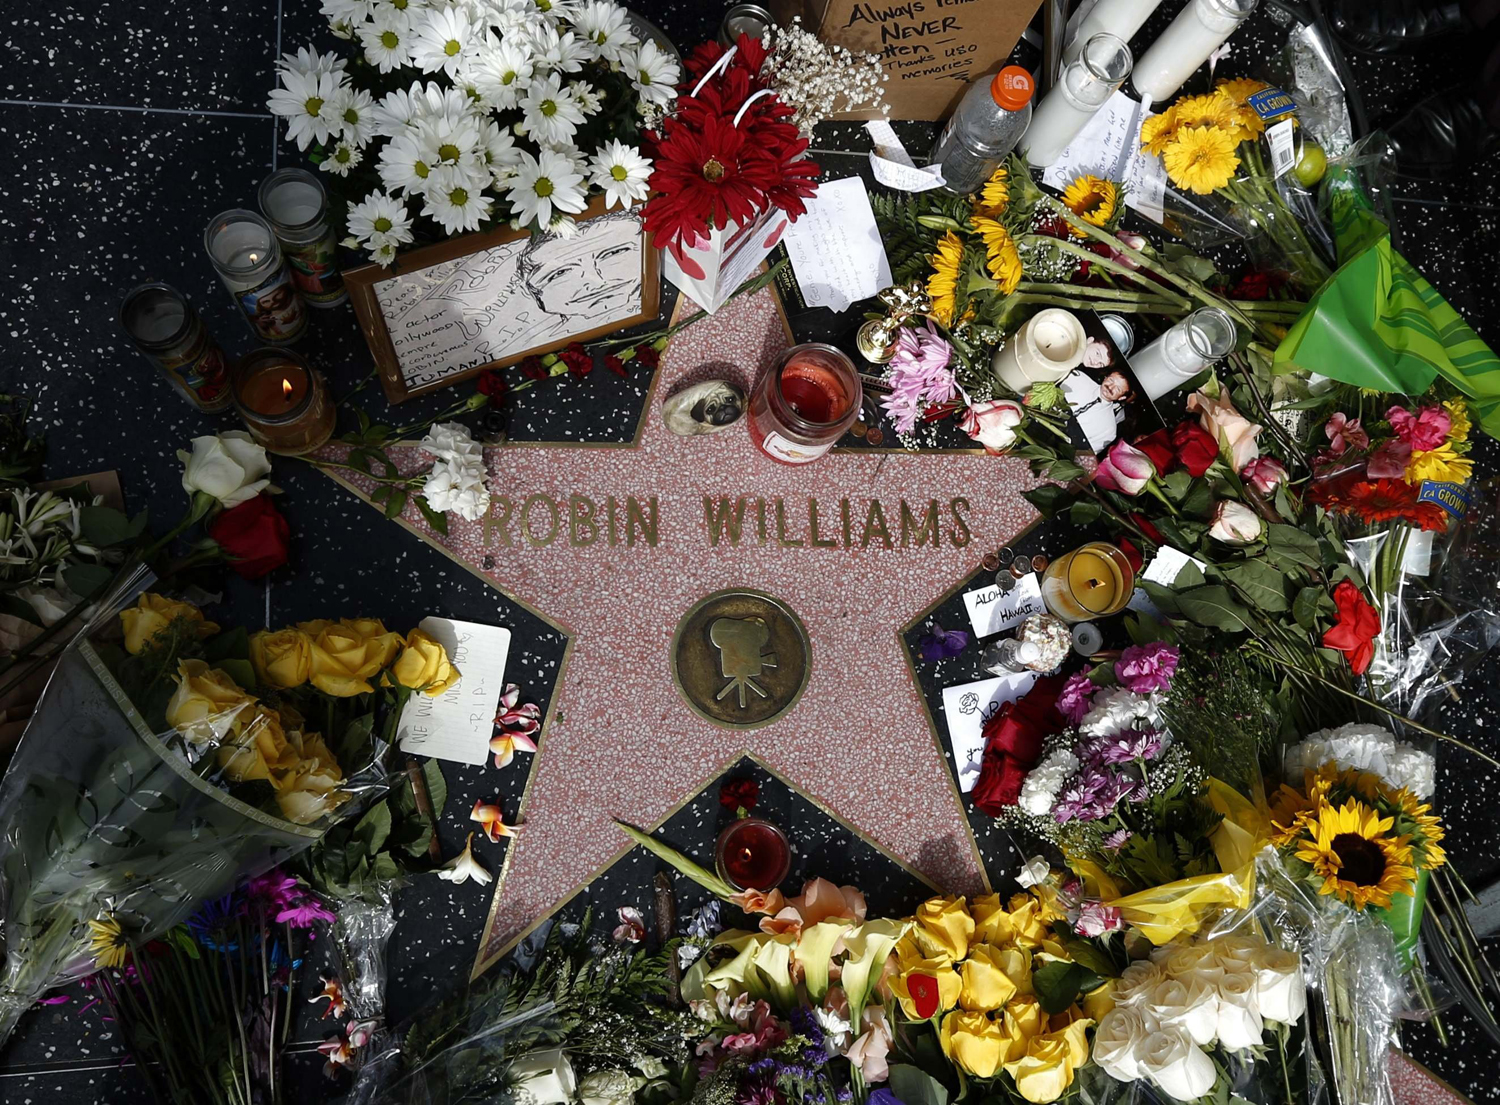 Aug. 12, 2014. Flowers are seen on the late Robin Williams' star on the Hollywood Walk of Fame in Los Angeles.